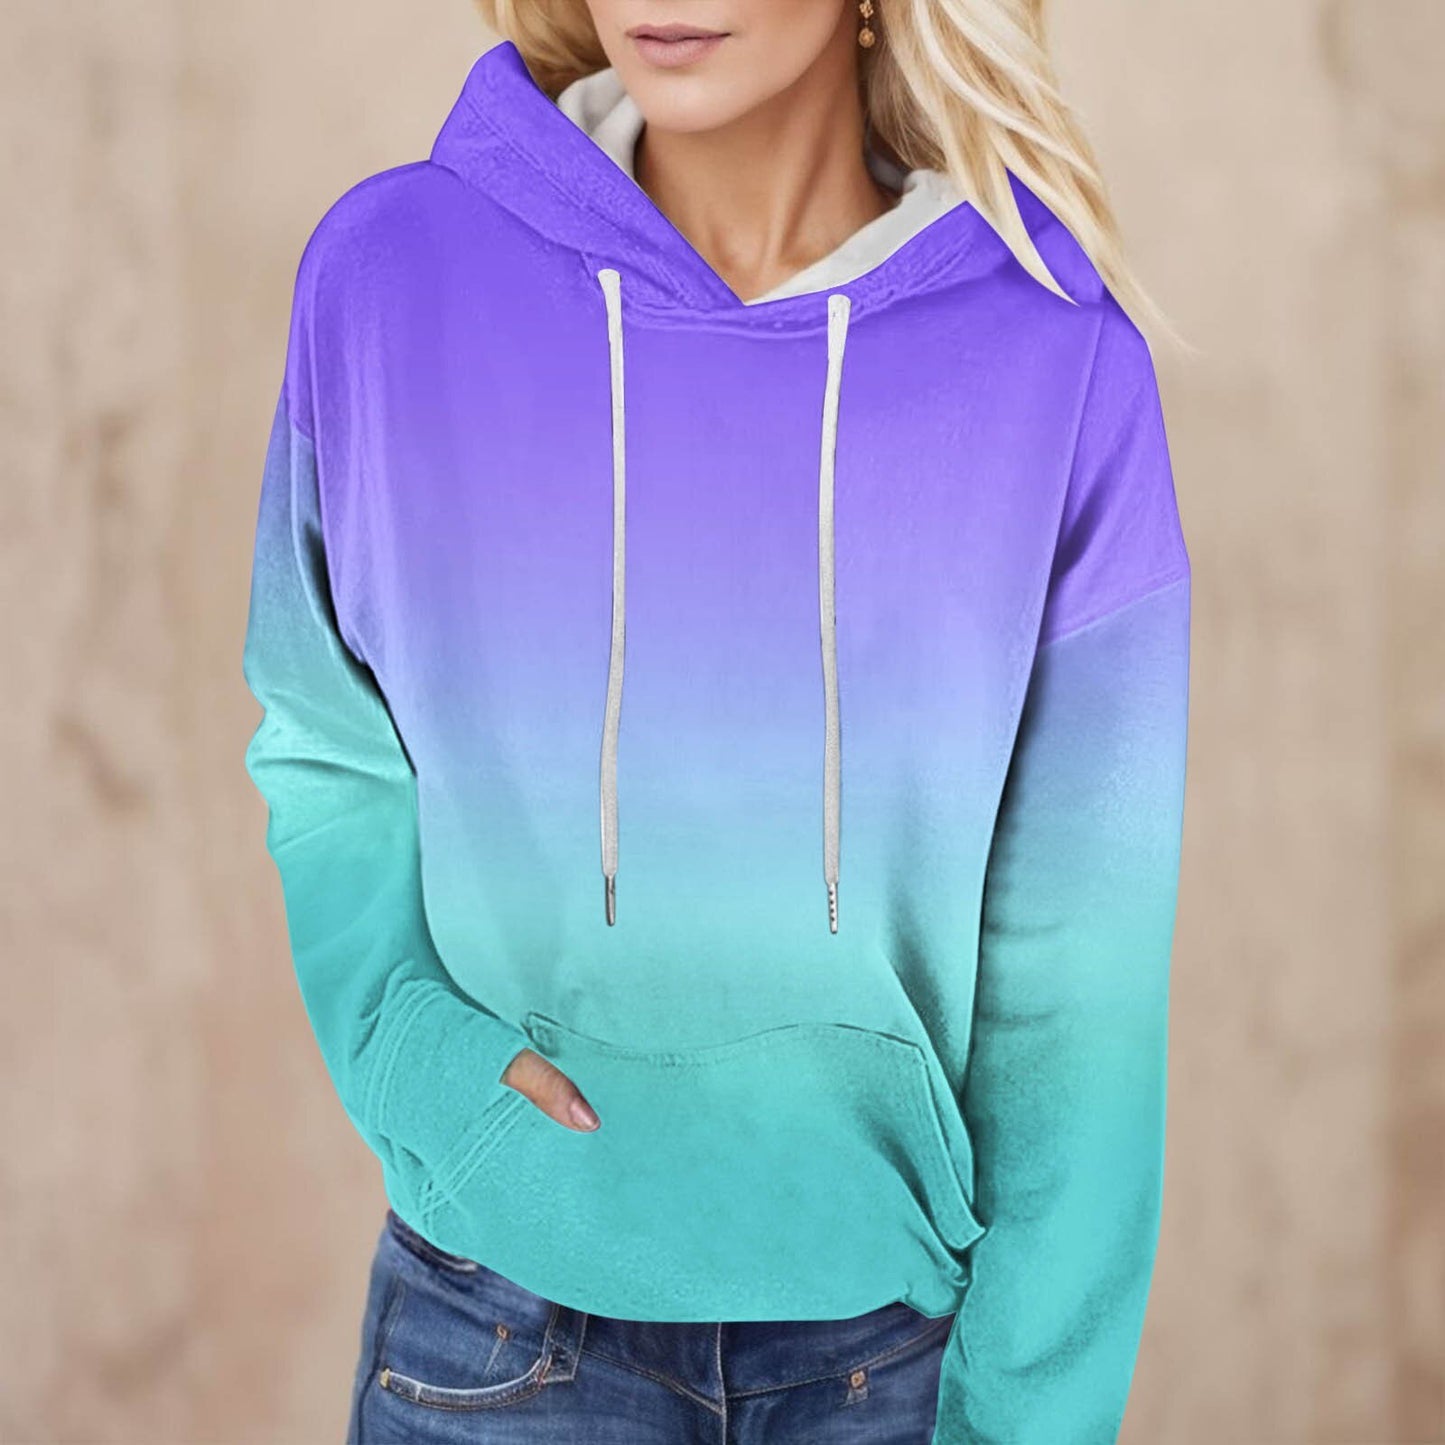 Hoodies For Women Retro Y2k Trendy Loose Sweatshirts Long Sleeve Gradient Patchwork Hooded Streetwear Fall Clothes With Pocket